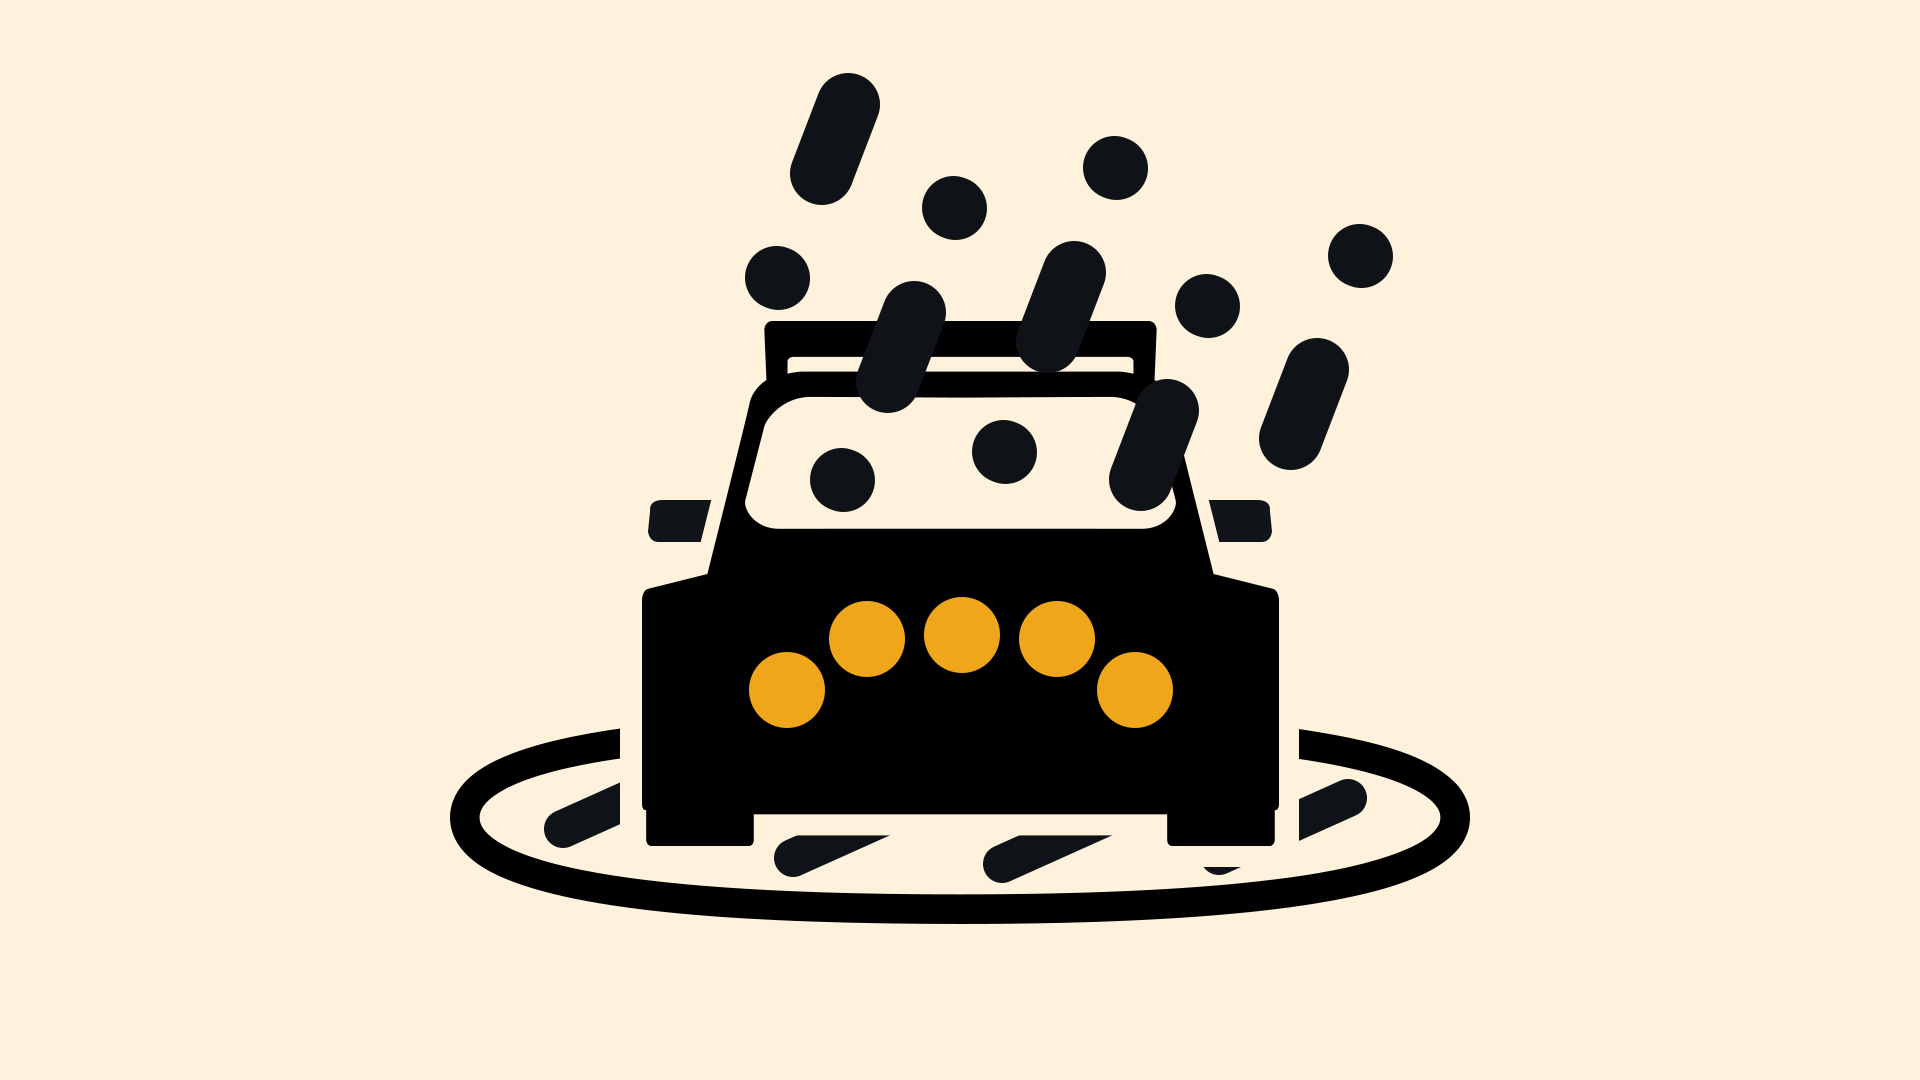 Icon for car wash